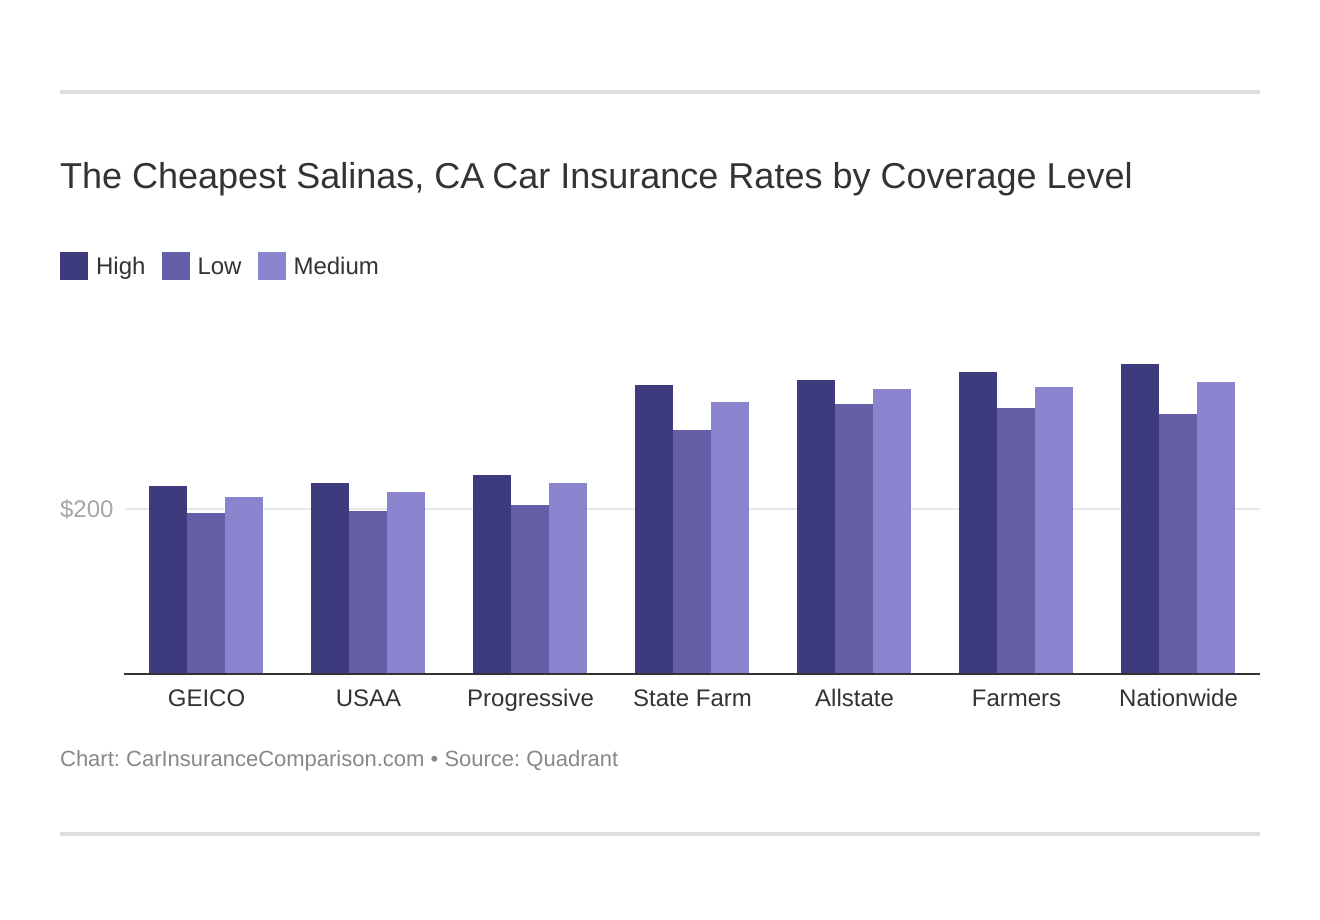 The Cheapest Salinas, CA Car Insurance Rates by Coverage Level